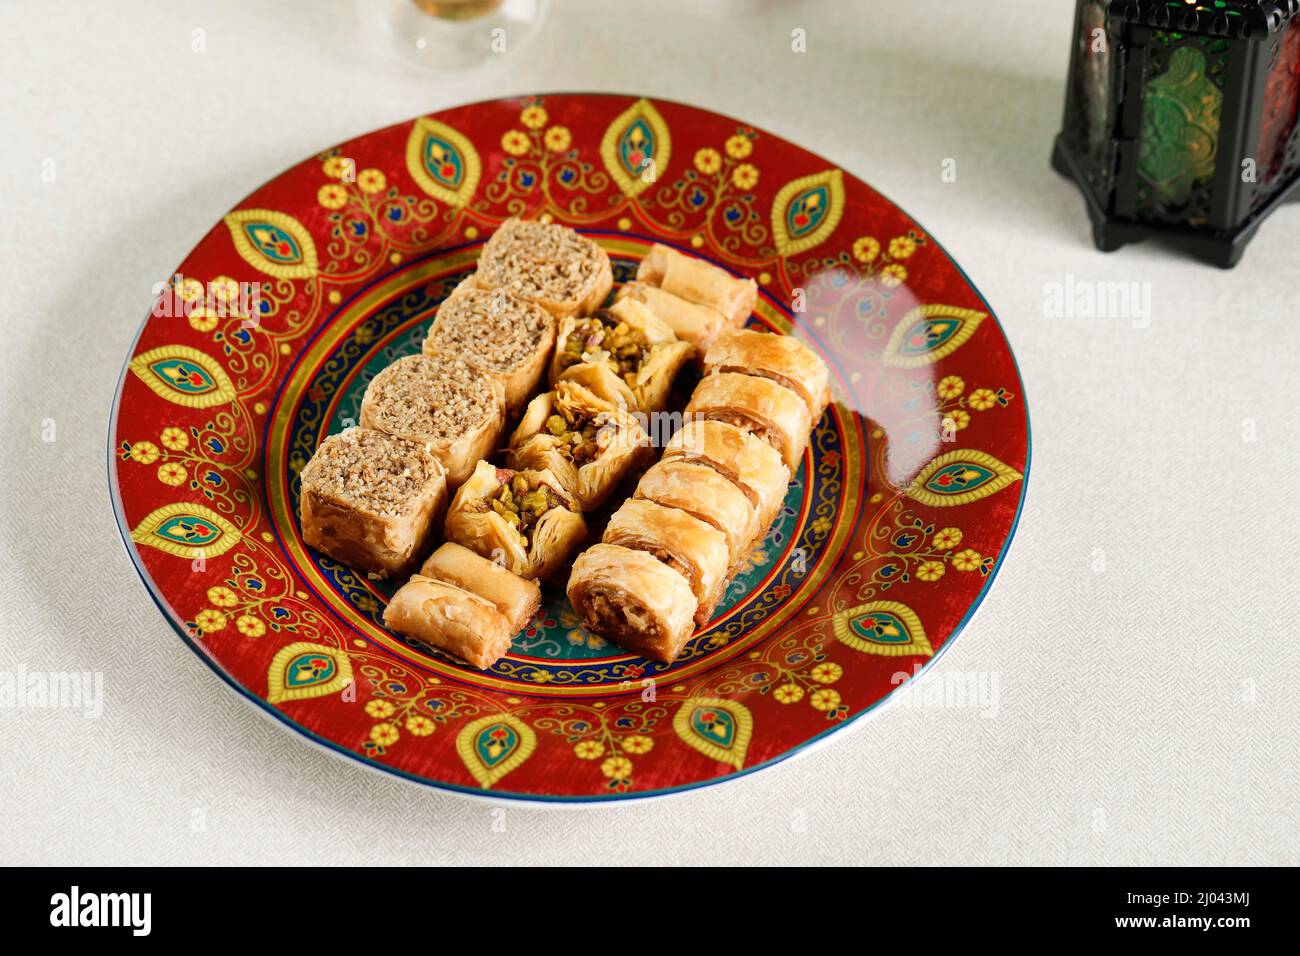 Mini Baklava Middle East Sweet on Moroccan Plate Stock Photo